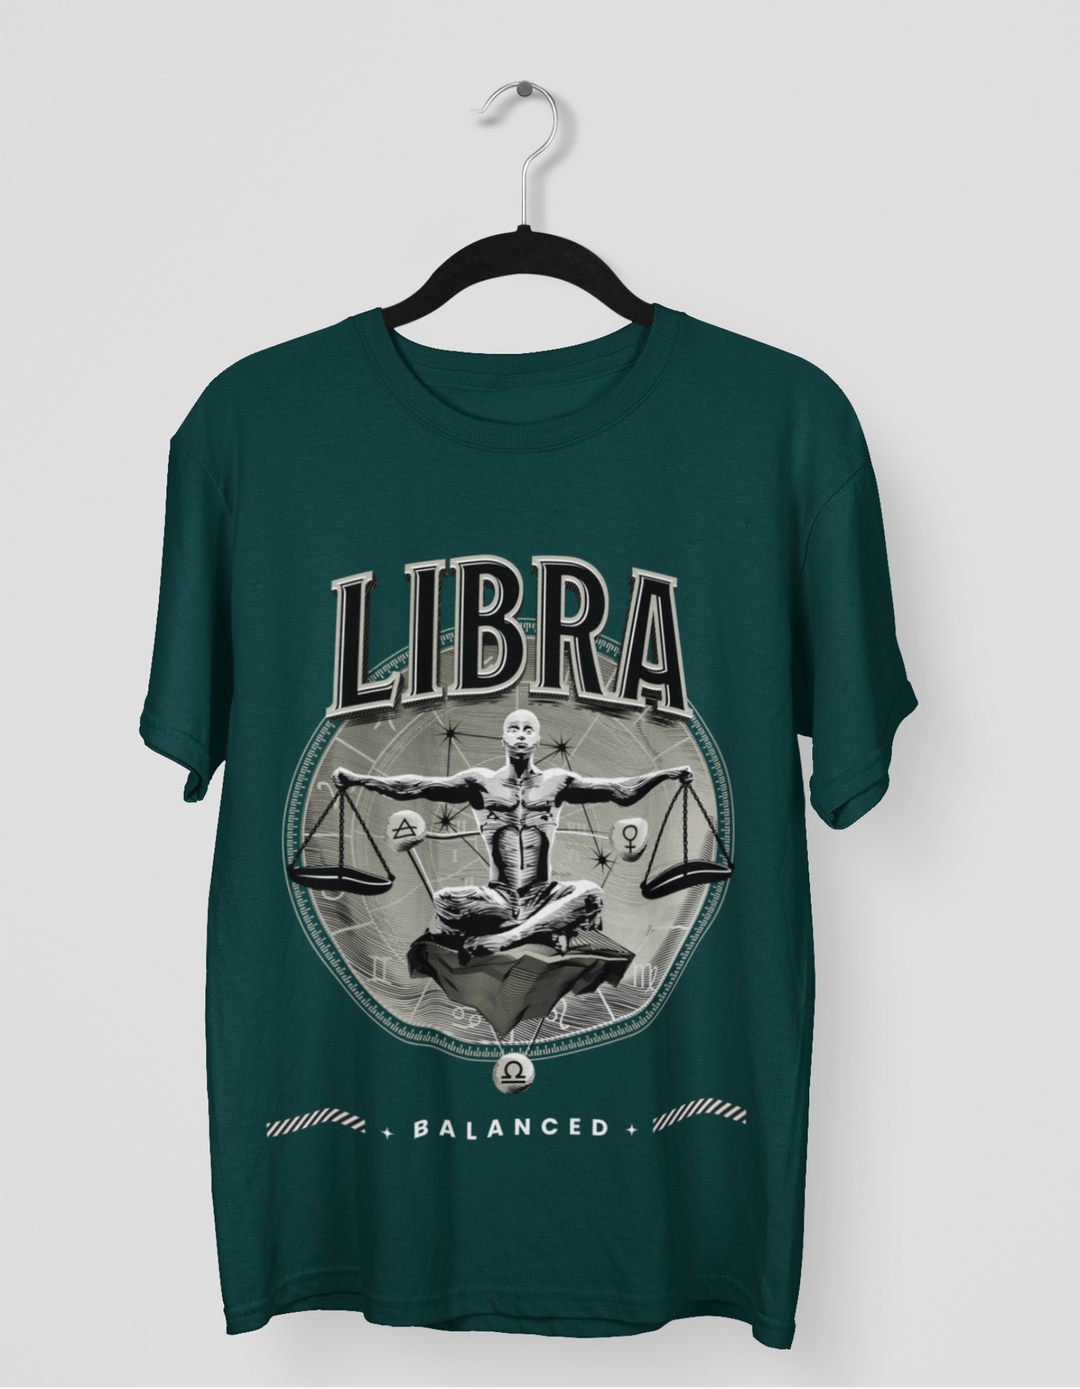 Libra: The Scales of Balance